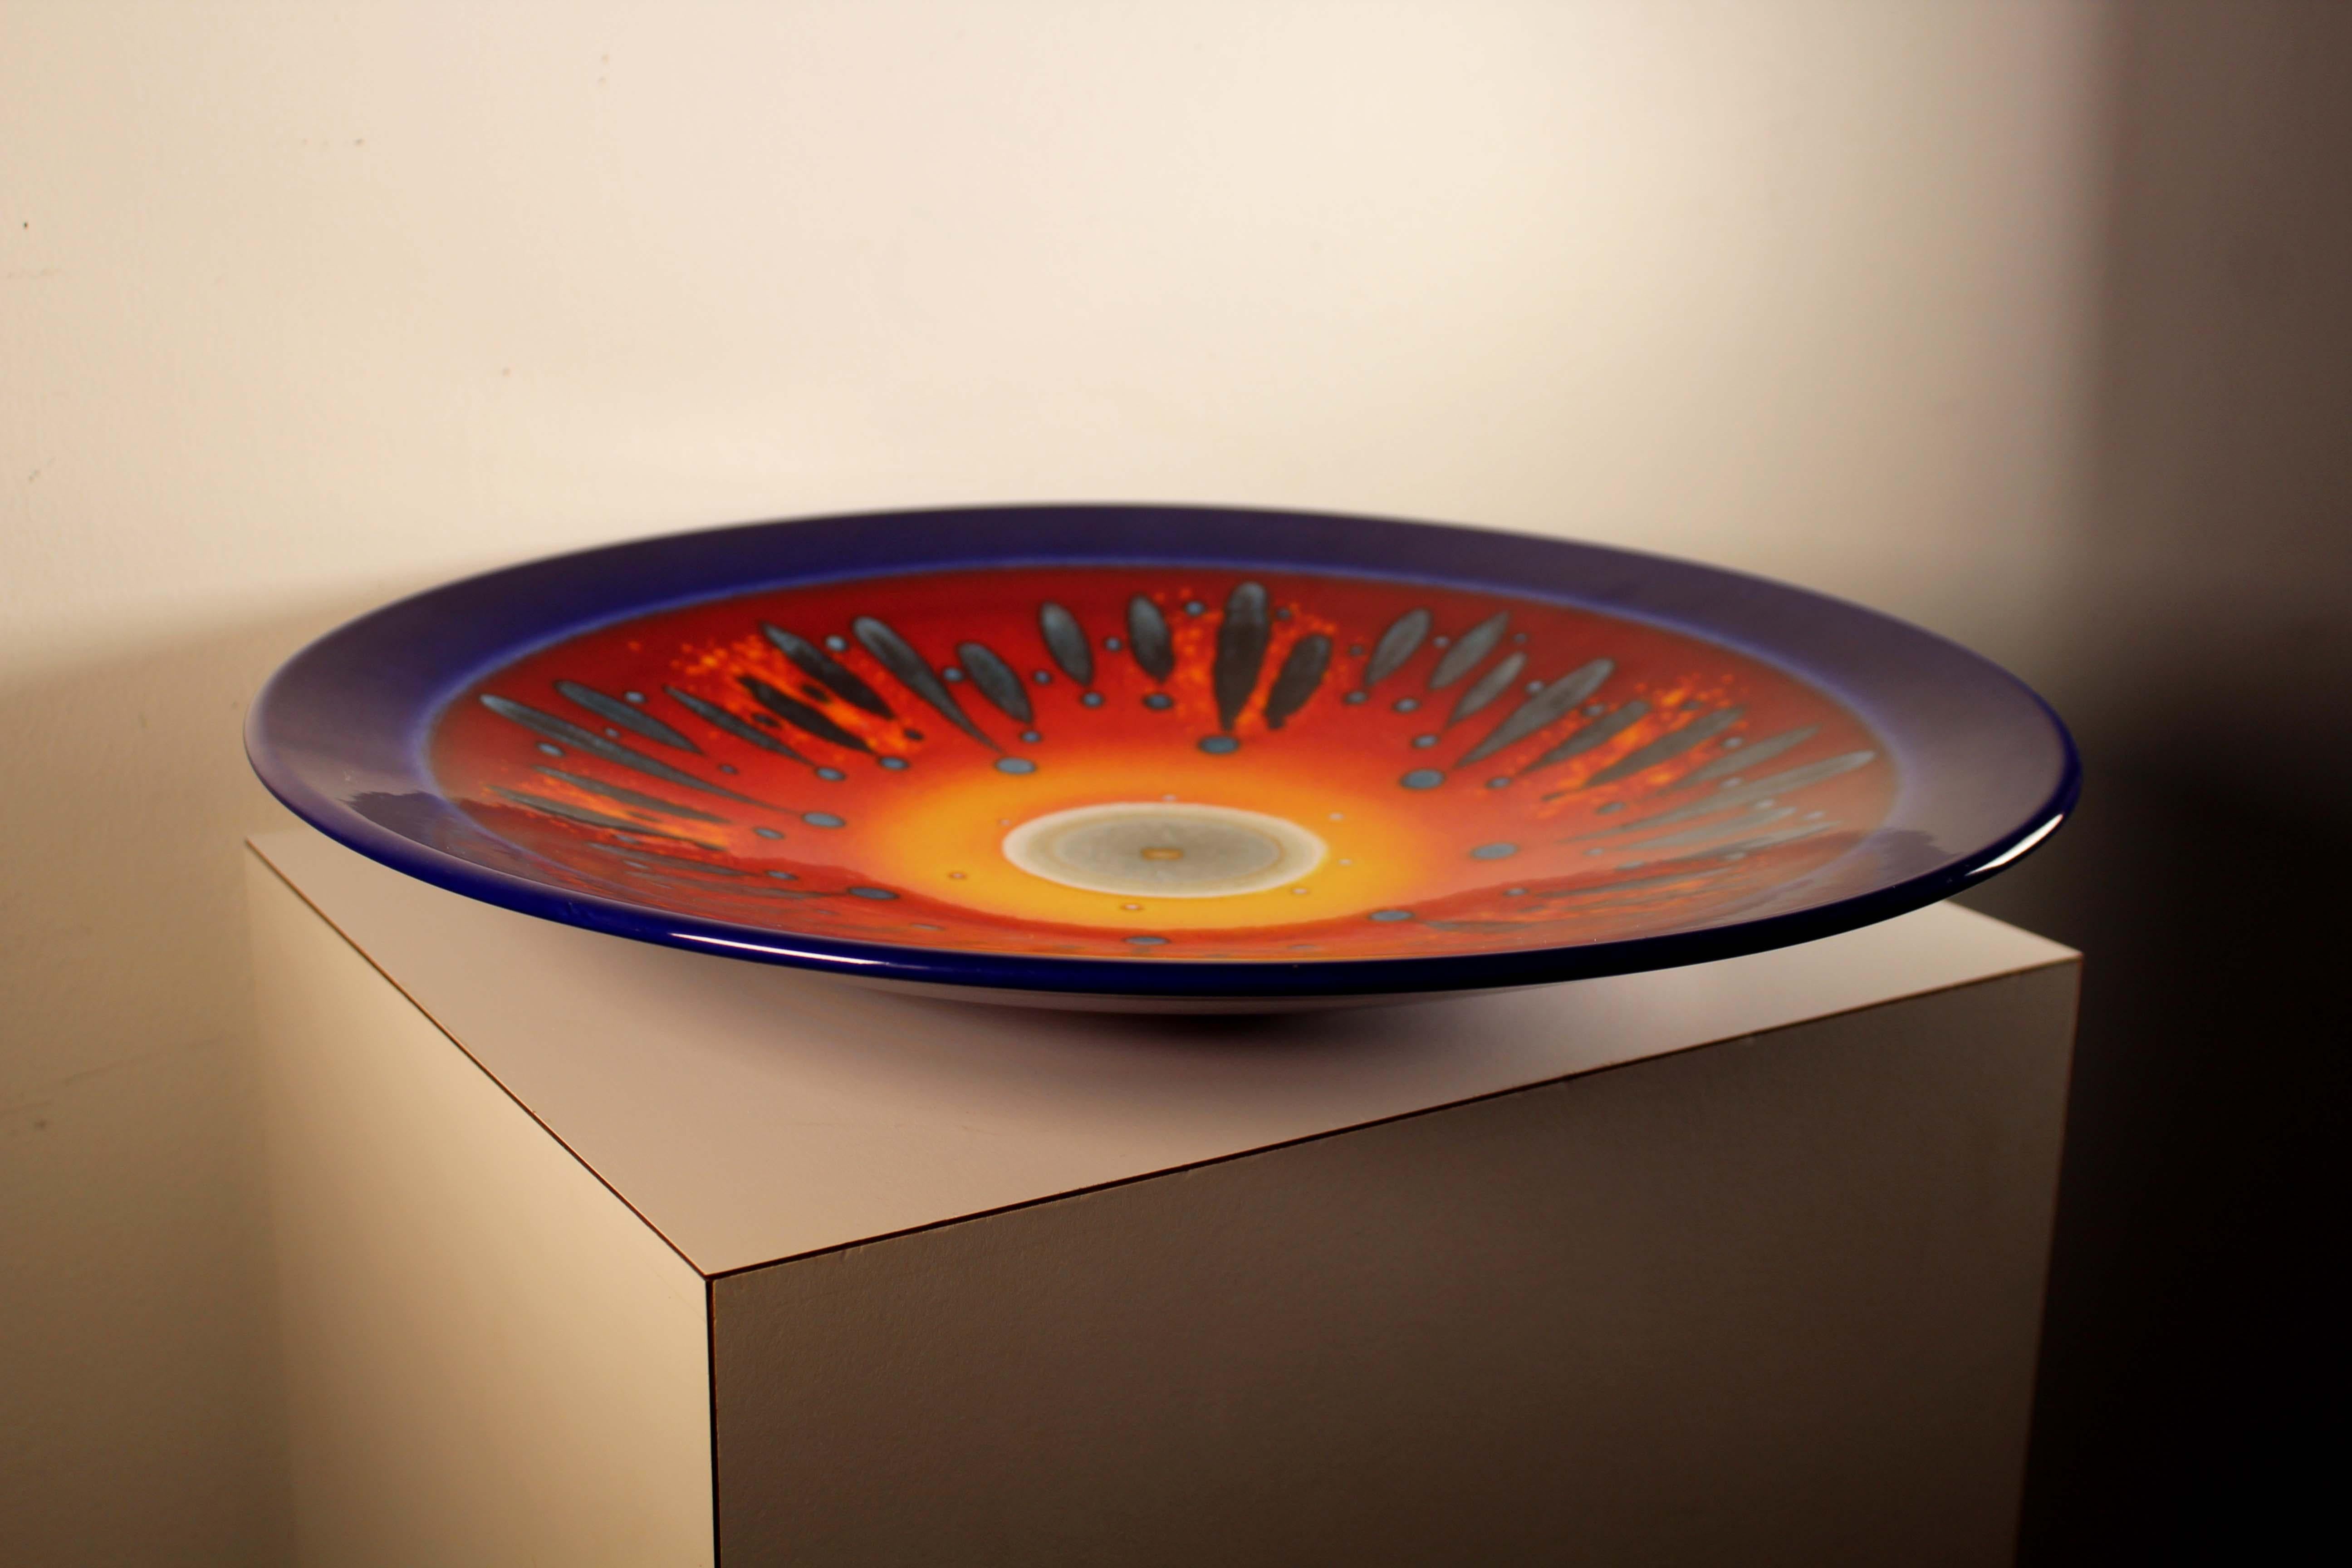 A Poole Pottery 'Third Millennium' pattern charger by Alan Clarke, decorated with an abstract design in yellow, orange and red against a dark blue ground, printed factory mark and blue painted signature to base. Dimensions: 16